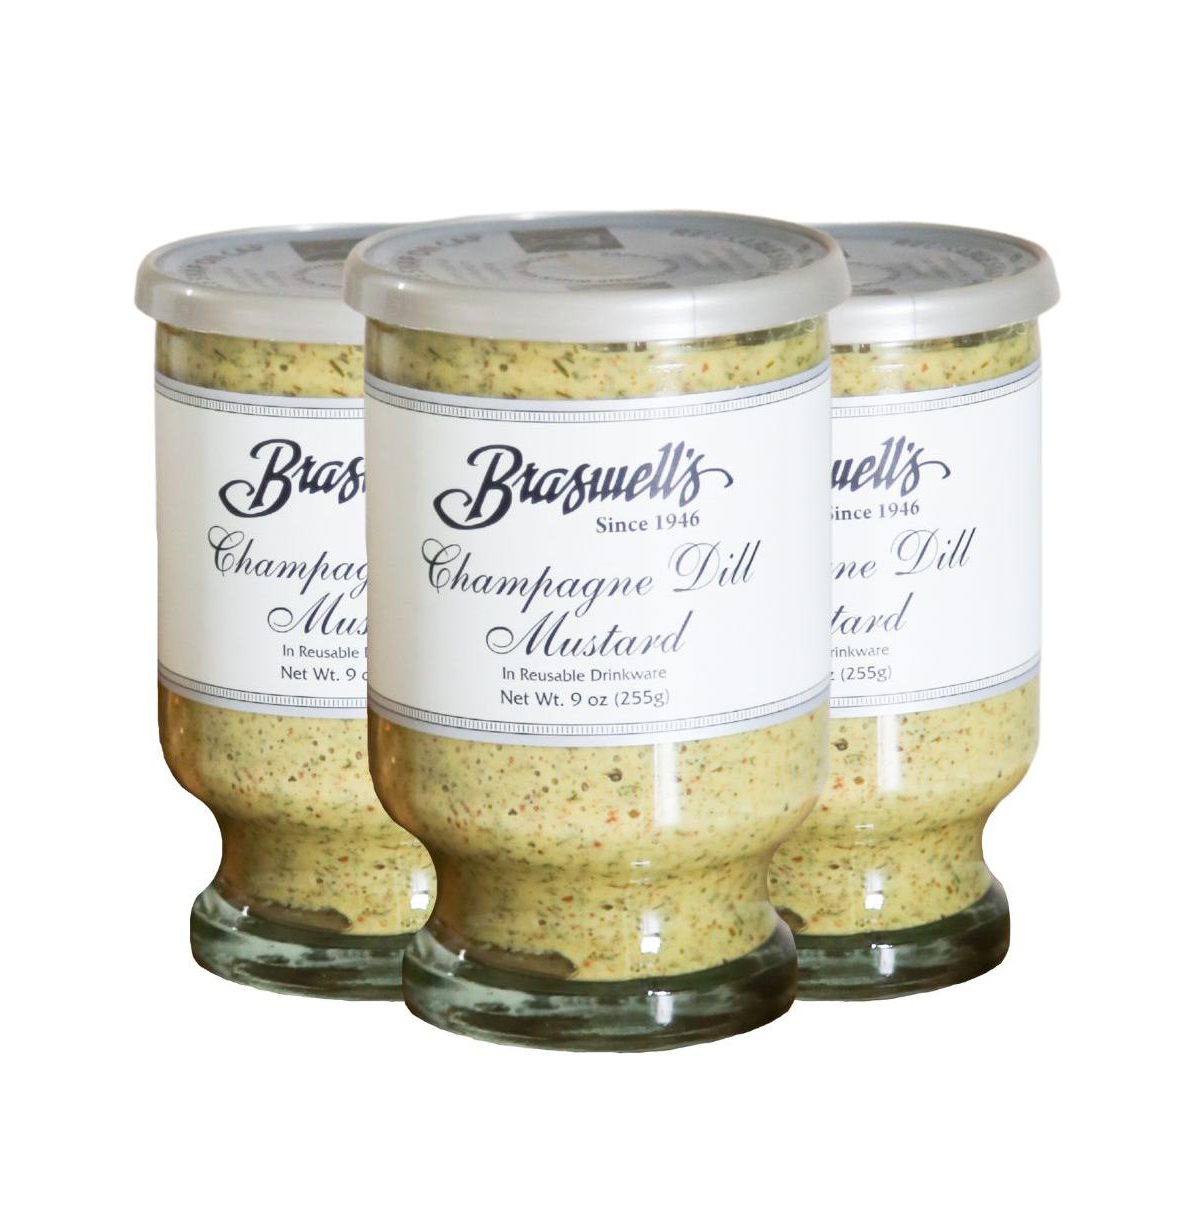 Braswells Gourmet Champagne Dill Mustard 9 oz (3 Pack)